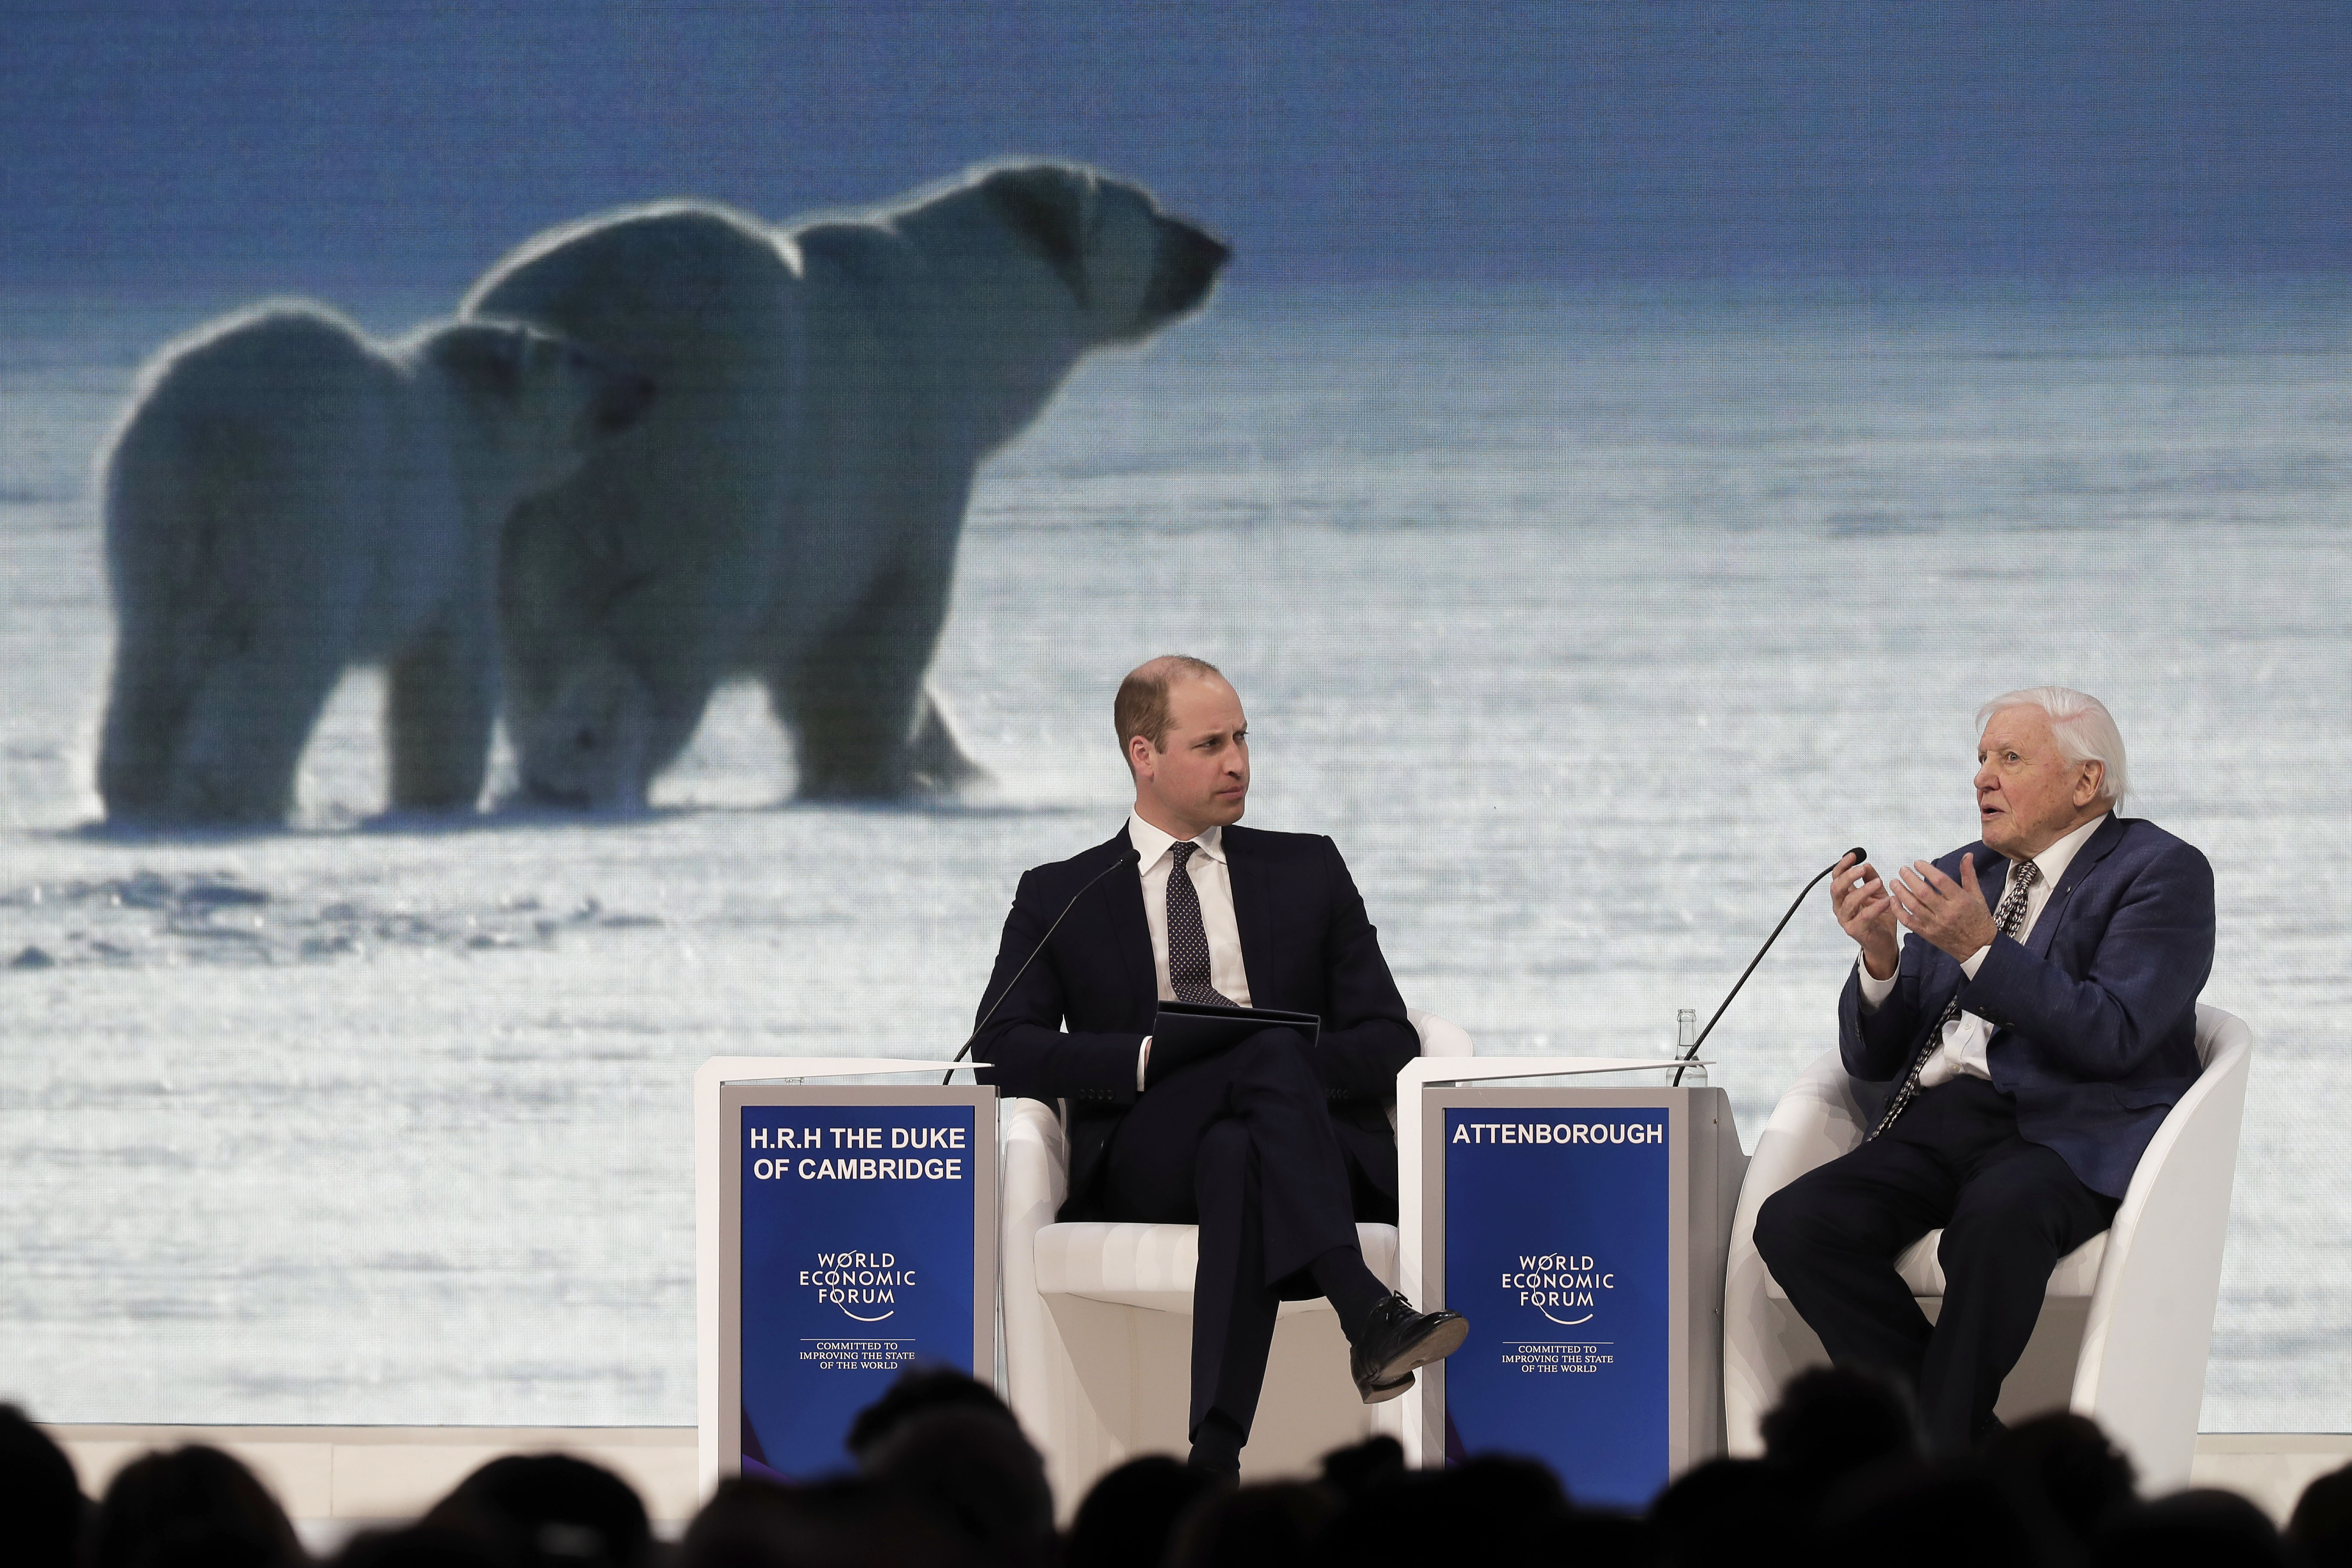 Britain's Prince William, left, listens to Sir David Attenborough, broadcaster and natural historian, during a session at the annual meeting of the World Economic Forum in Davos, Switzerland, Tuesday, Jan. 22, 2019. (AP Photo/Markus Schreiber)